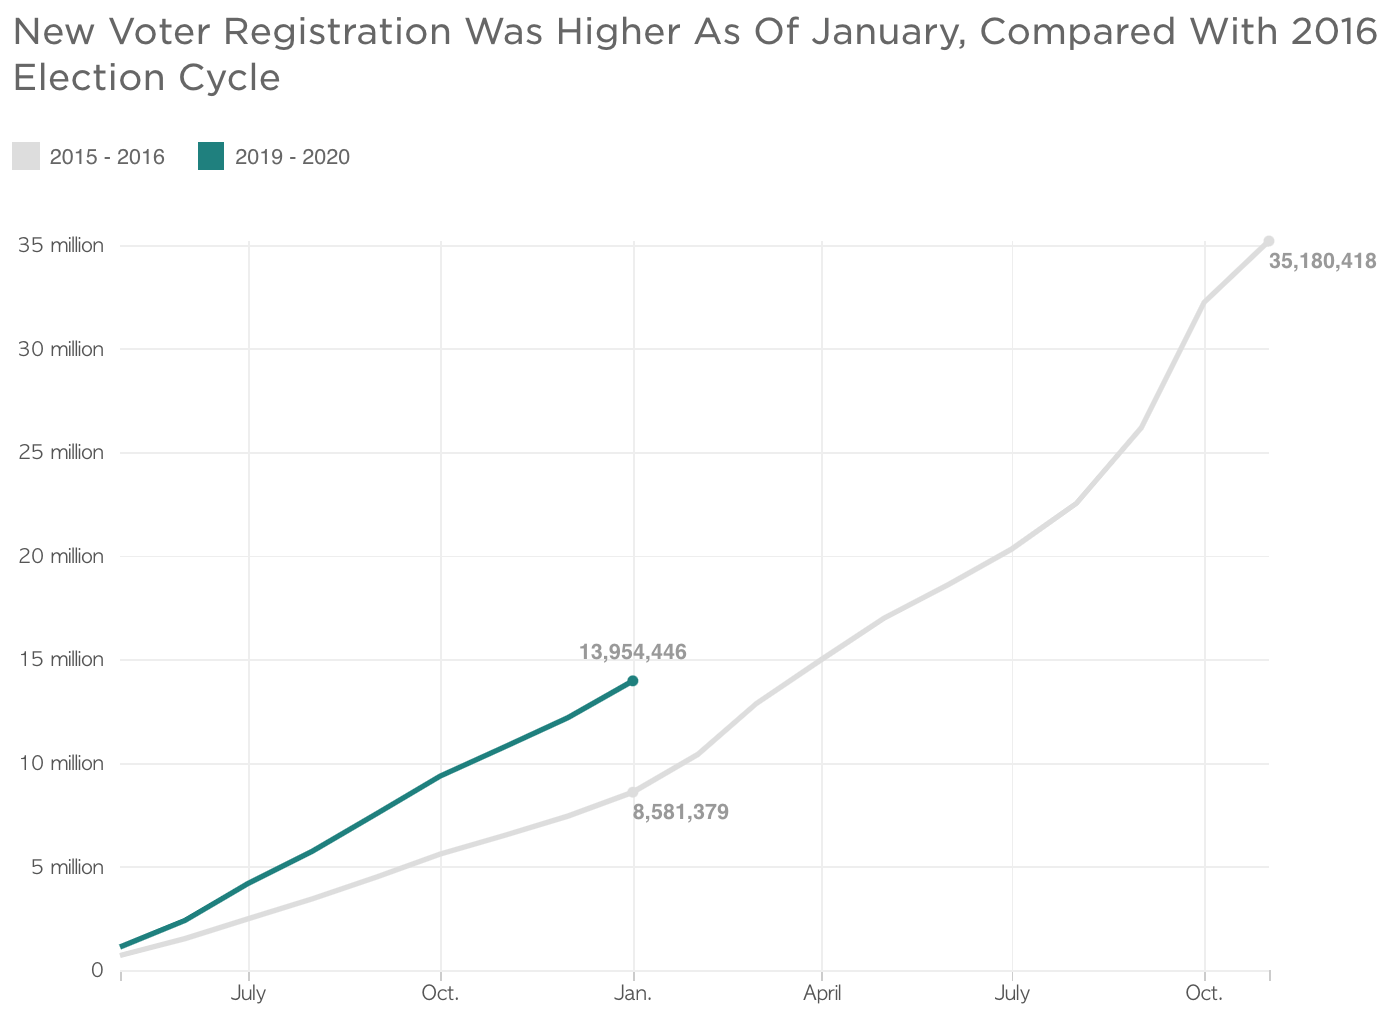 New Voter Registration Was Higher As Of January, Compared With 2016 Election Cycle